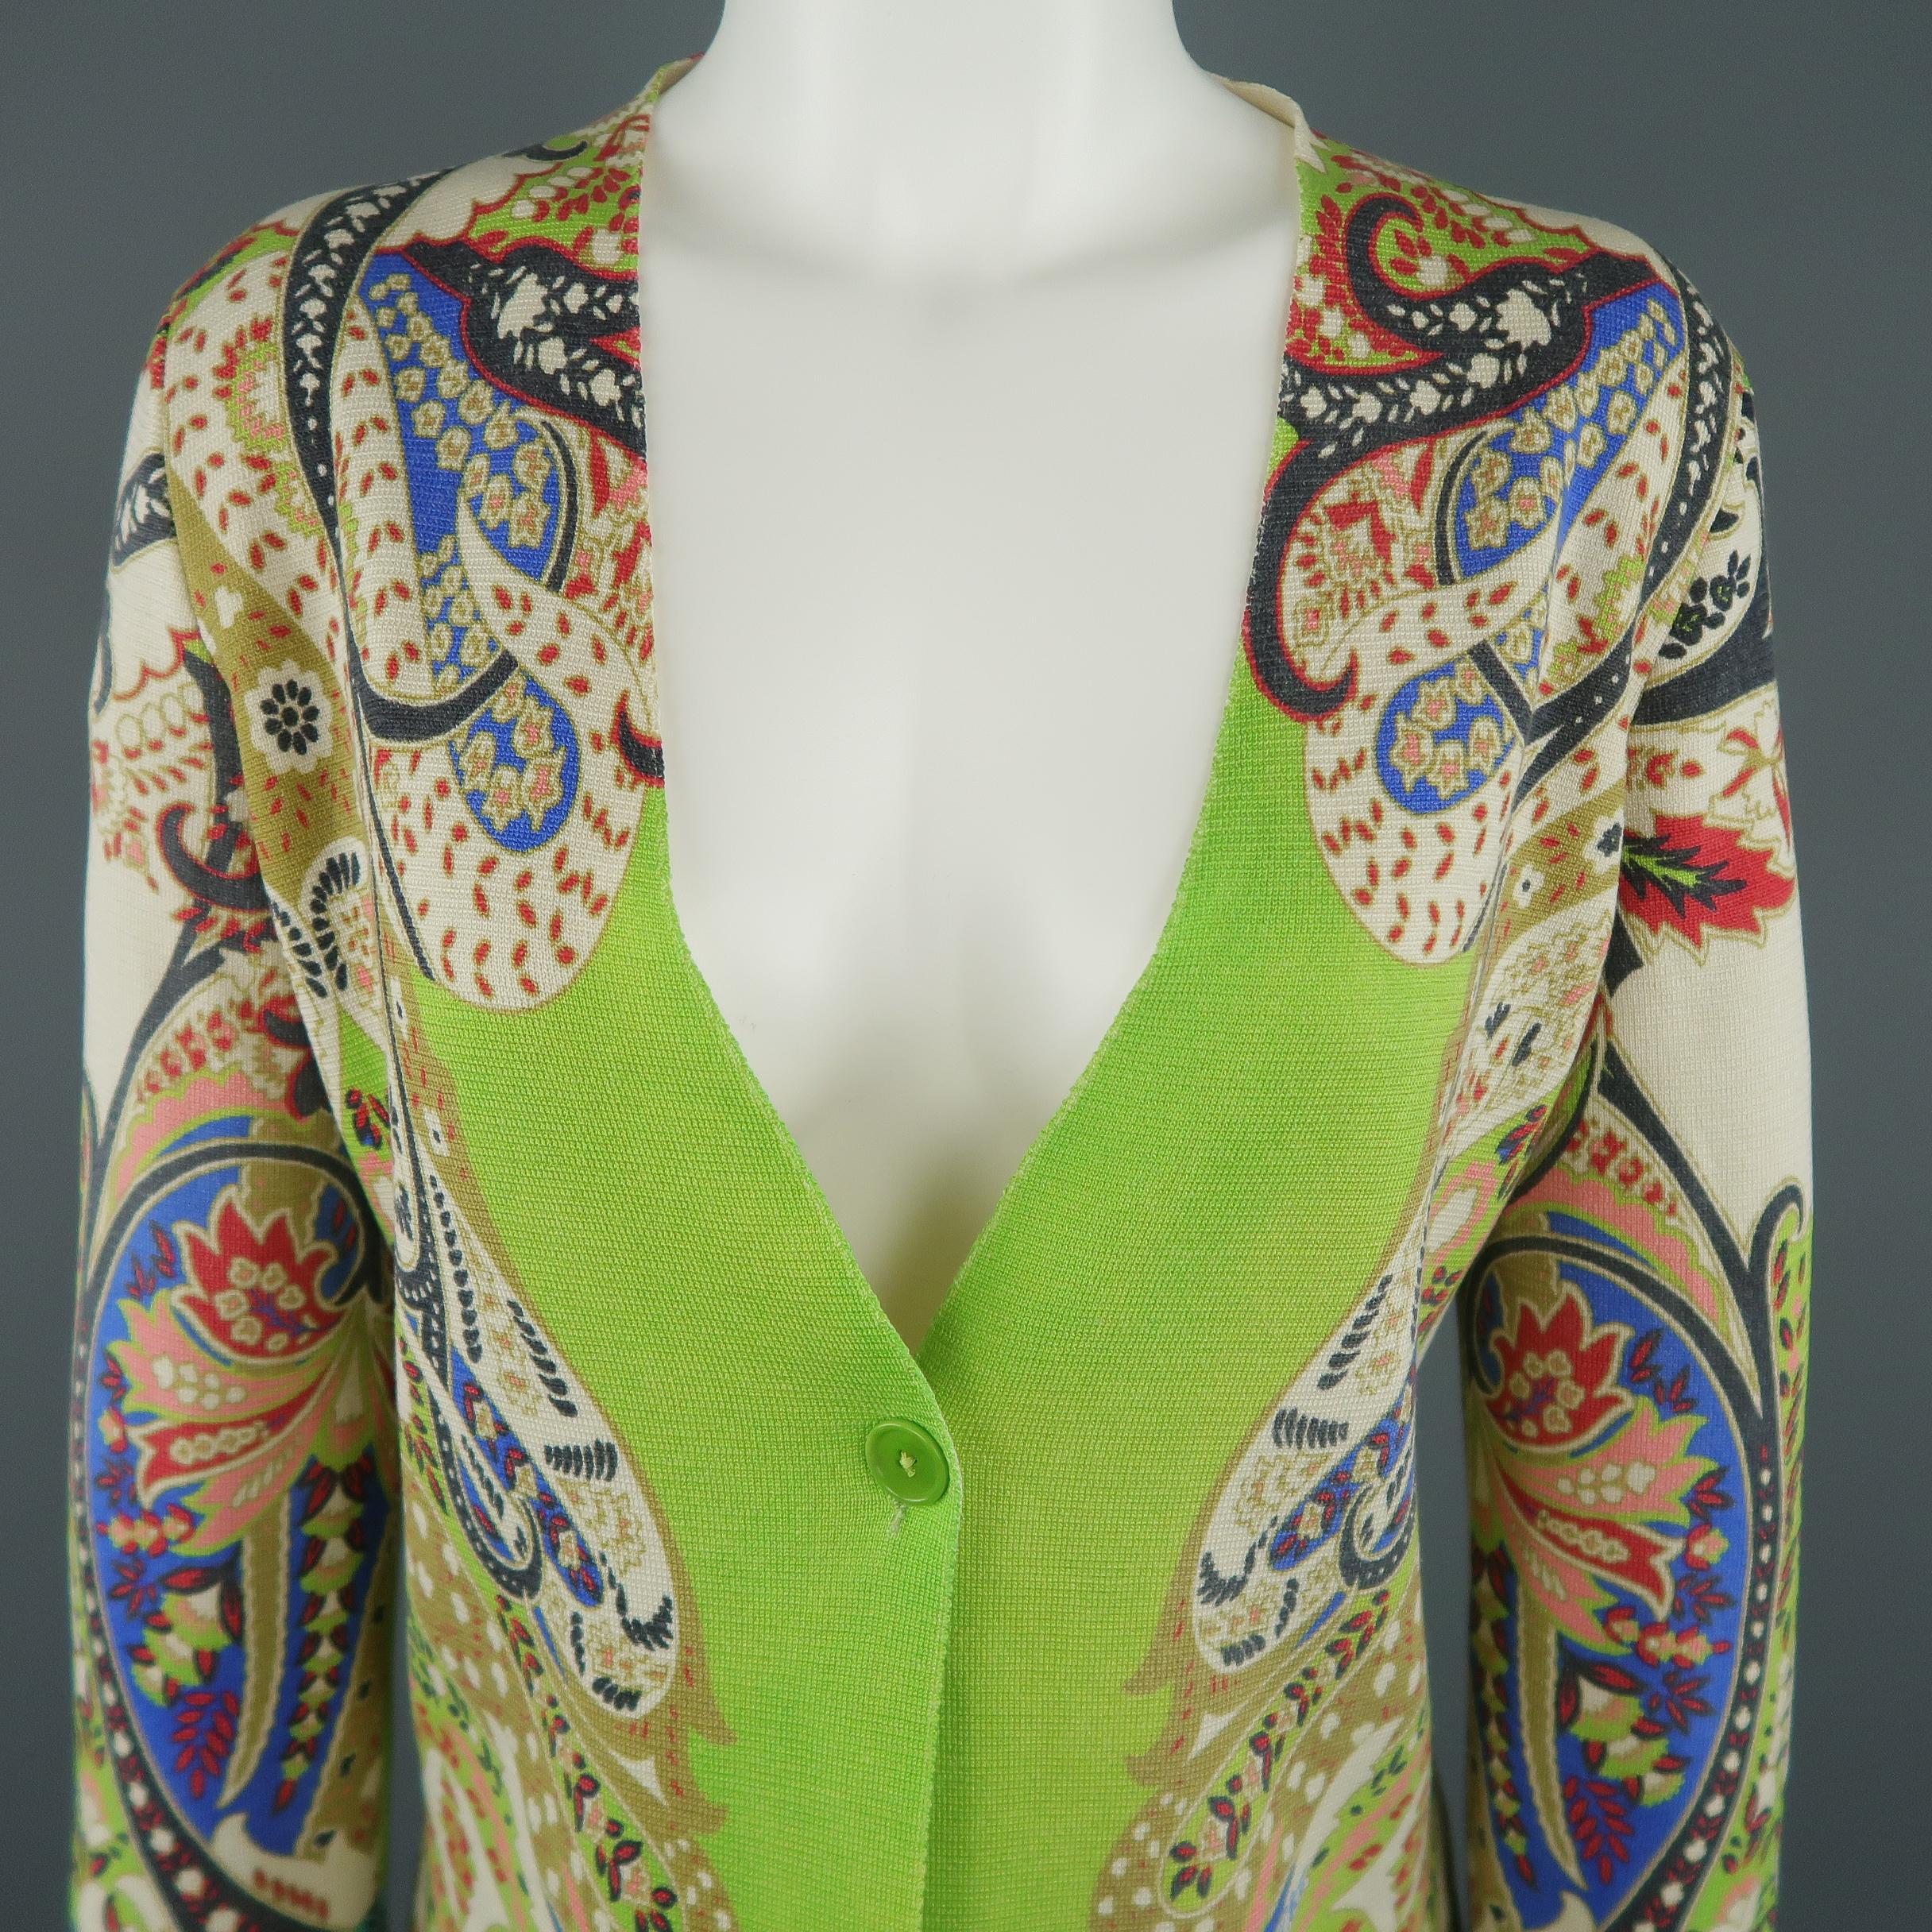 ETRO cardigan comes in a green silk knit with symmetrical abstract paisley print, v neck, and single button closure. Made in Italy.
 
Very Good Pre-Owned Condition.
Marked: IT 42
 
Measurements:
 
Shoulder: 16 in.
Chest: 40 in.
Sleeve: 22